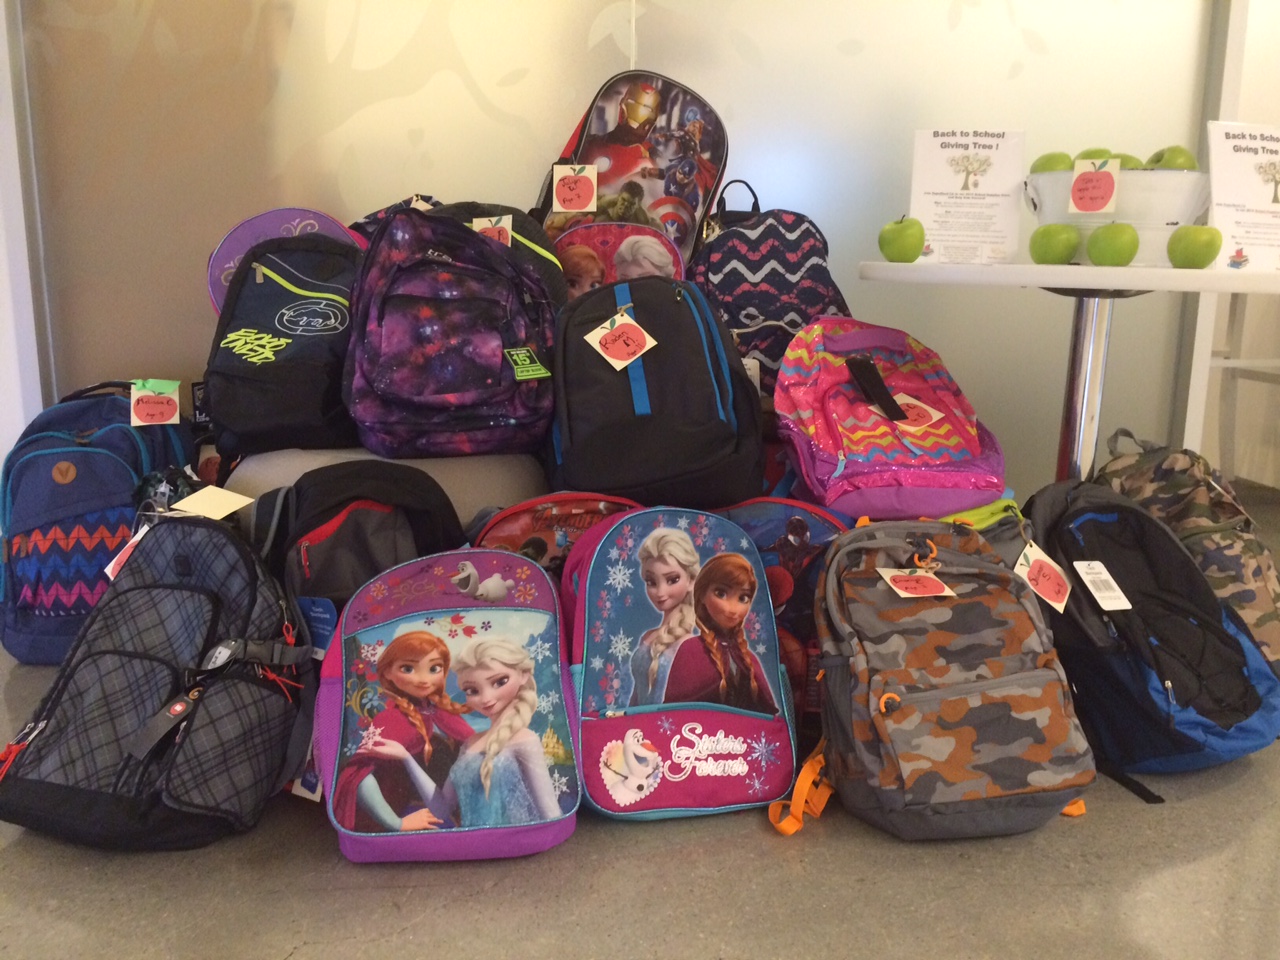  Some of the backpacks gathered for the 2015 back-to-school drive 